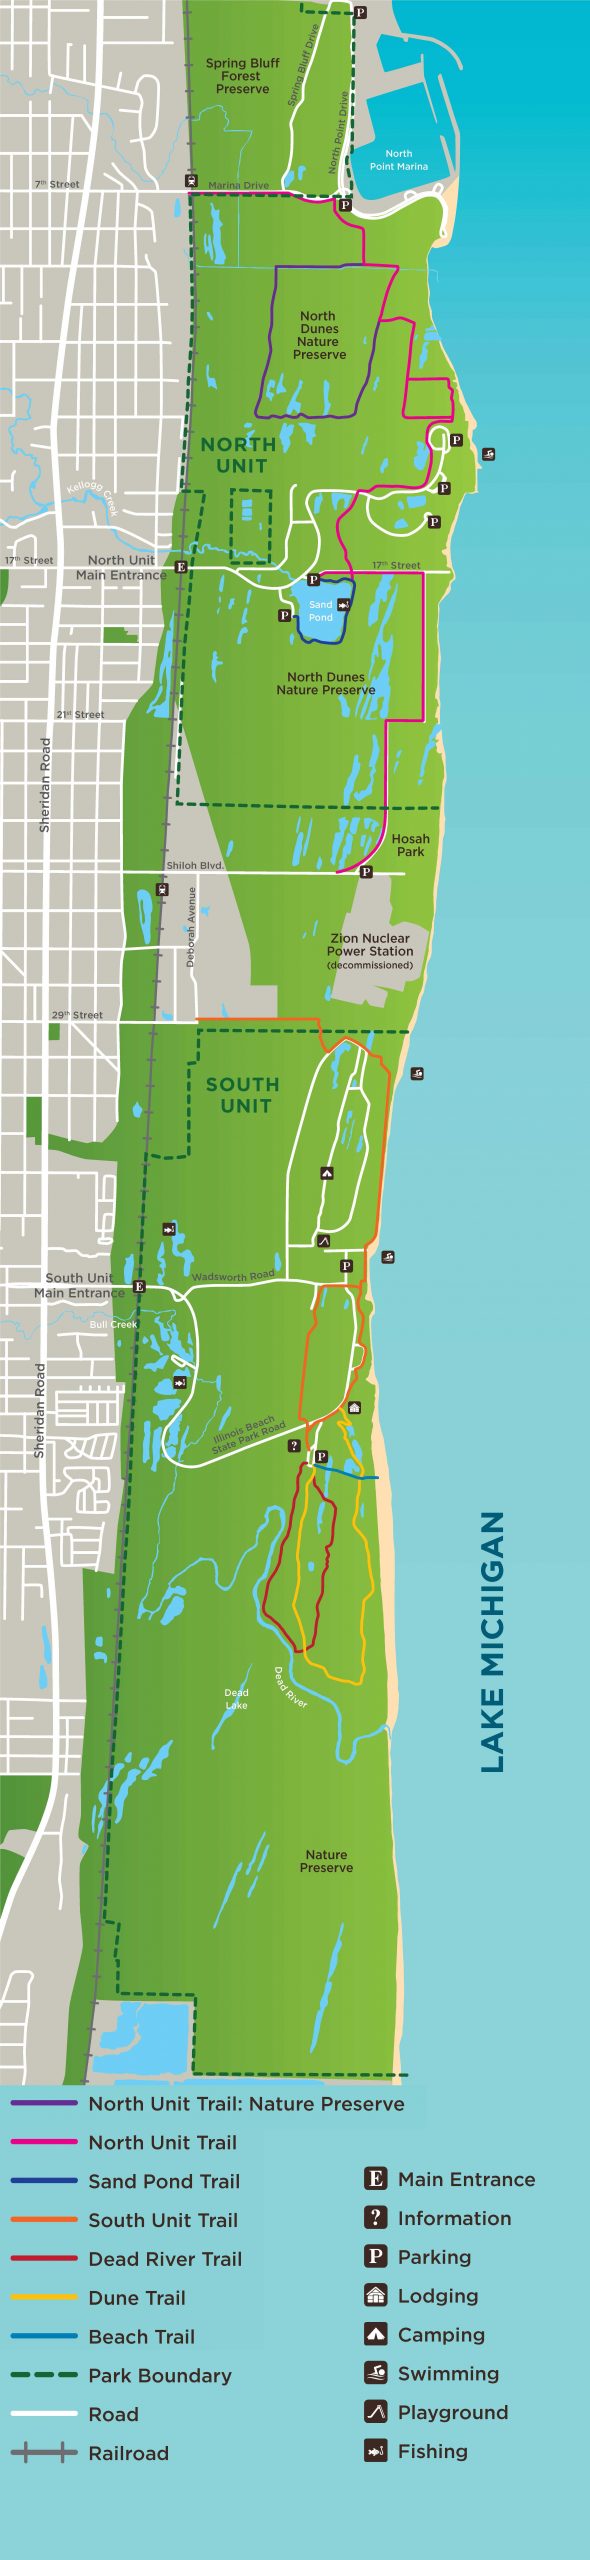 Illinois Beach State Park map showing north and south unit